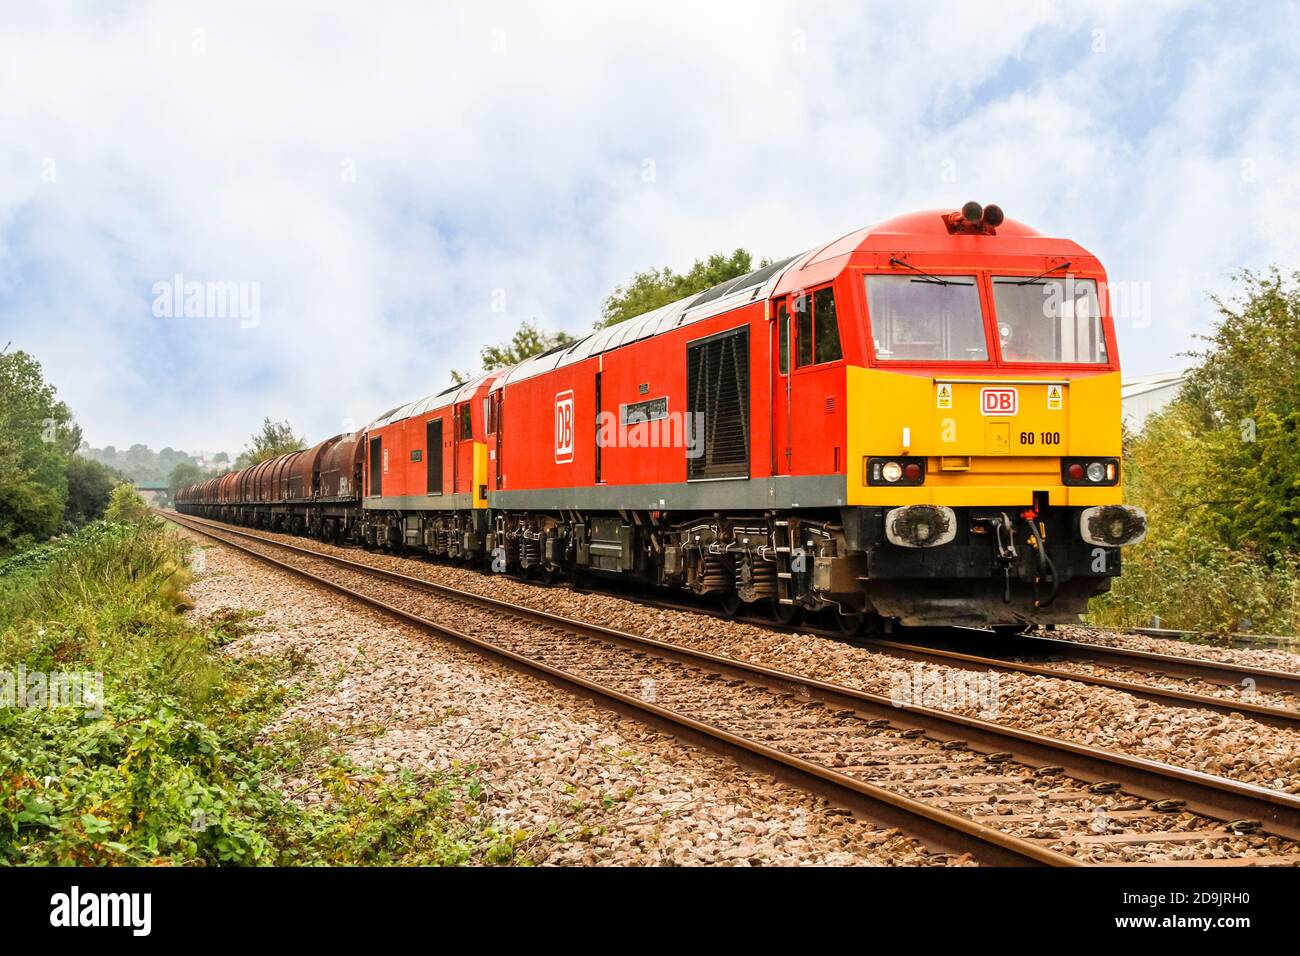 A diesel locomotive hauled freight train with two Class 60 locomotives operated by D B Cargo at Colwick, Nottingham, England, UK Stock Photo